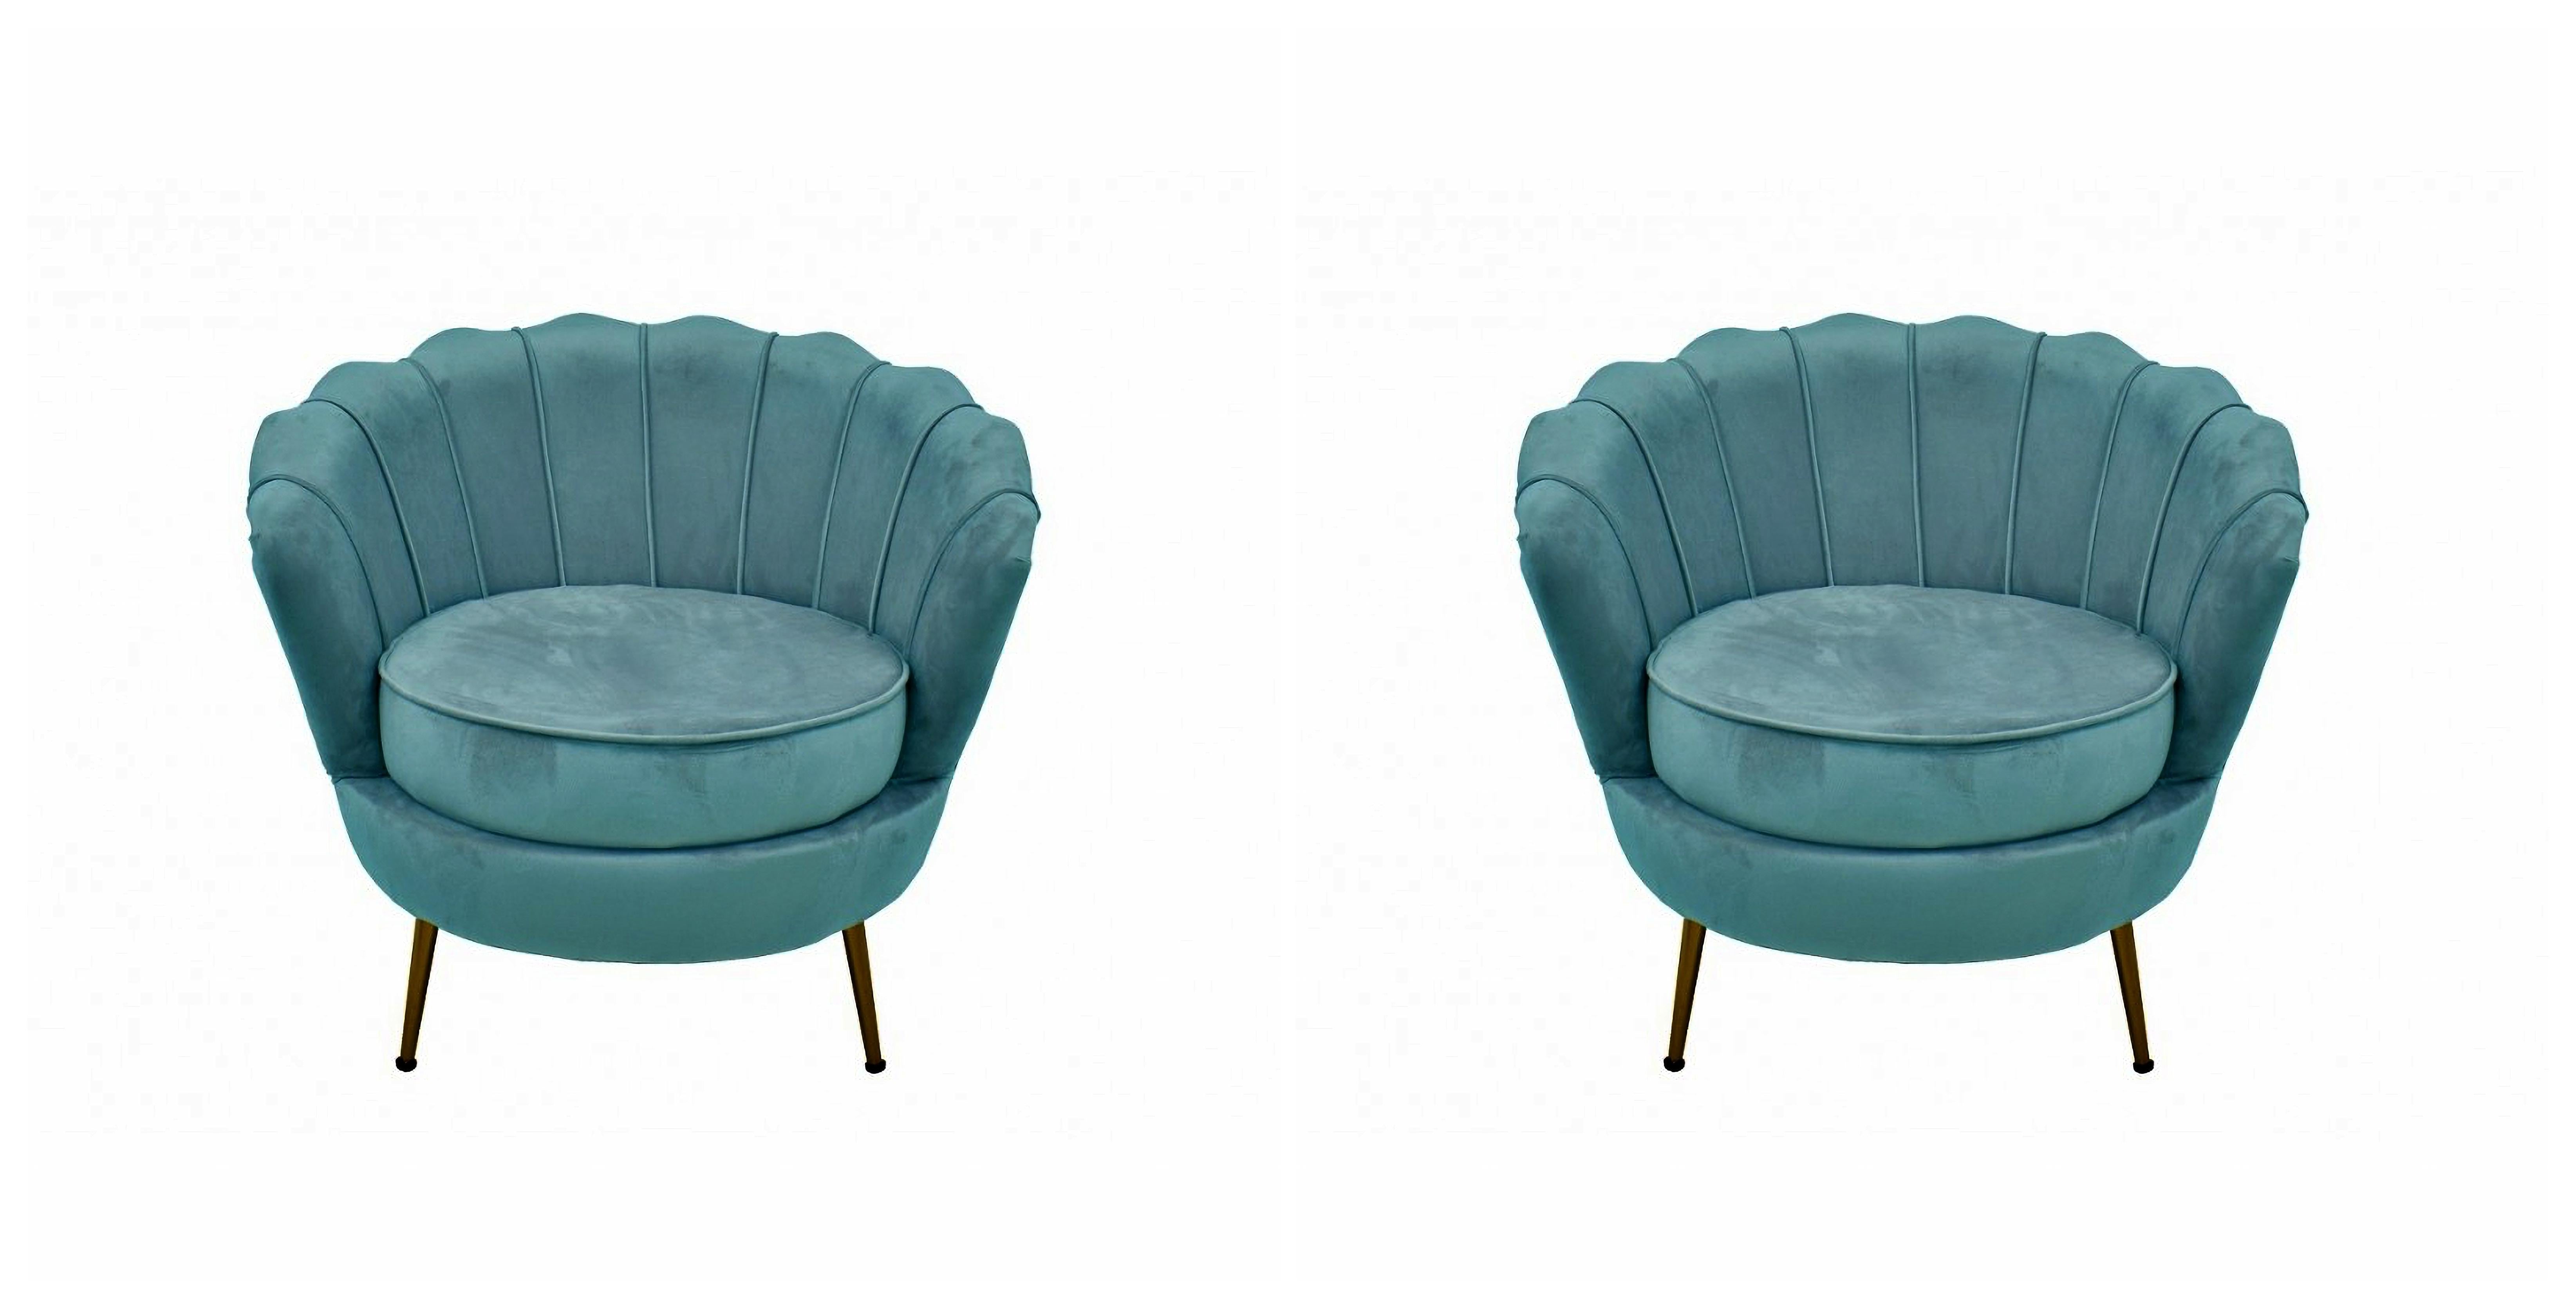 Pair Armchair Turquoise Velvet Upholstered New

DATA SHEET:

-Design armchair

-Made with solid wooden structure.

-High-density polyurethane foam.

-Upholstered in turquoise velvet fabric

-Metallic legs with gold finish

-2 and 3